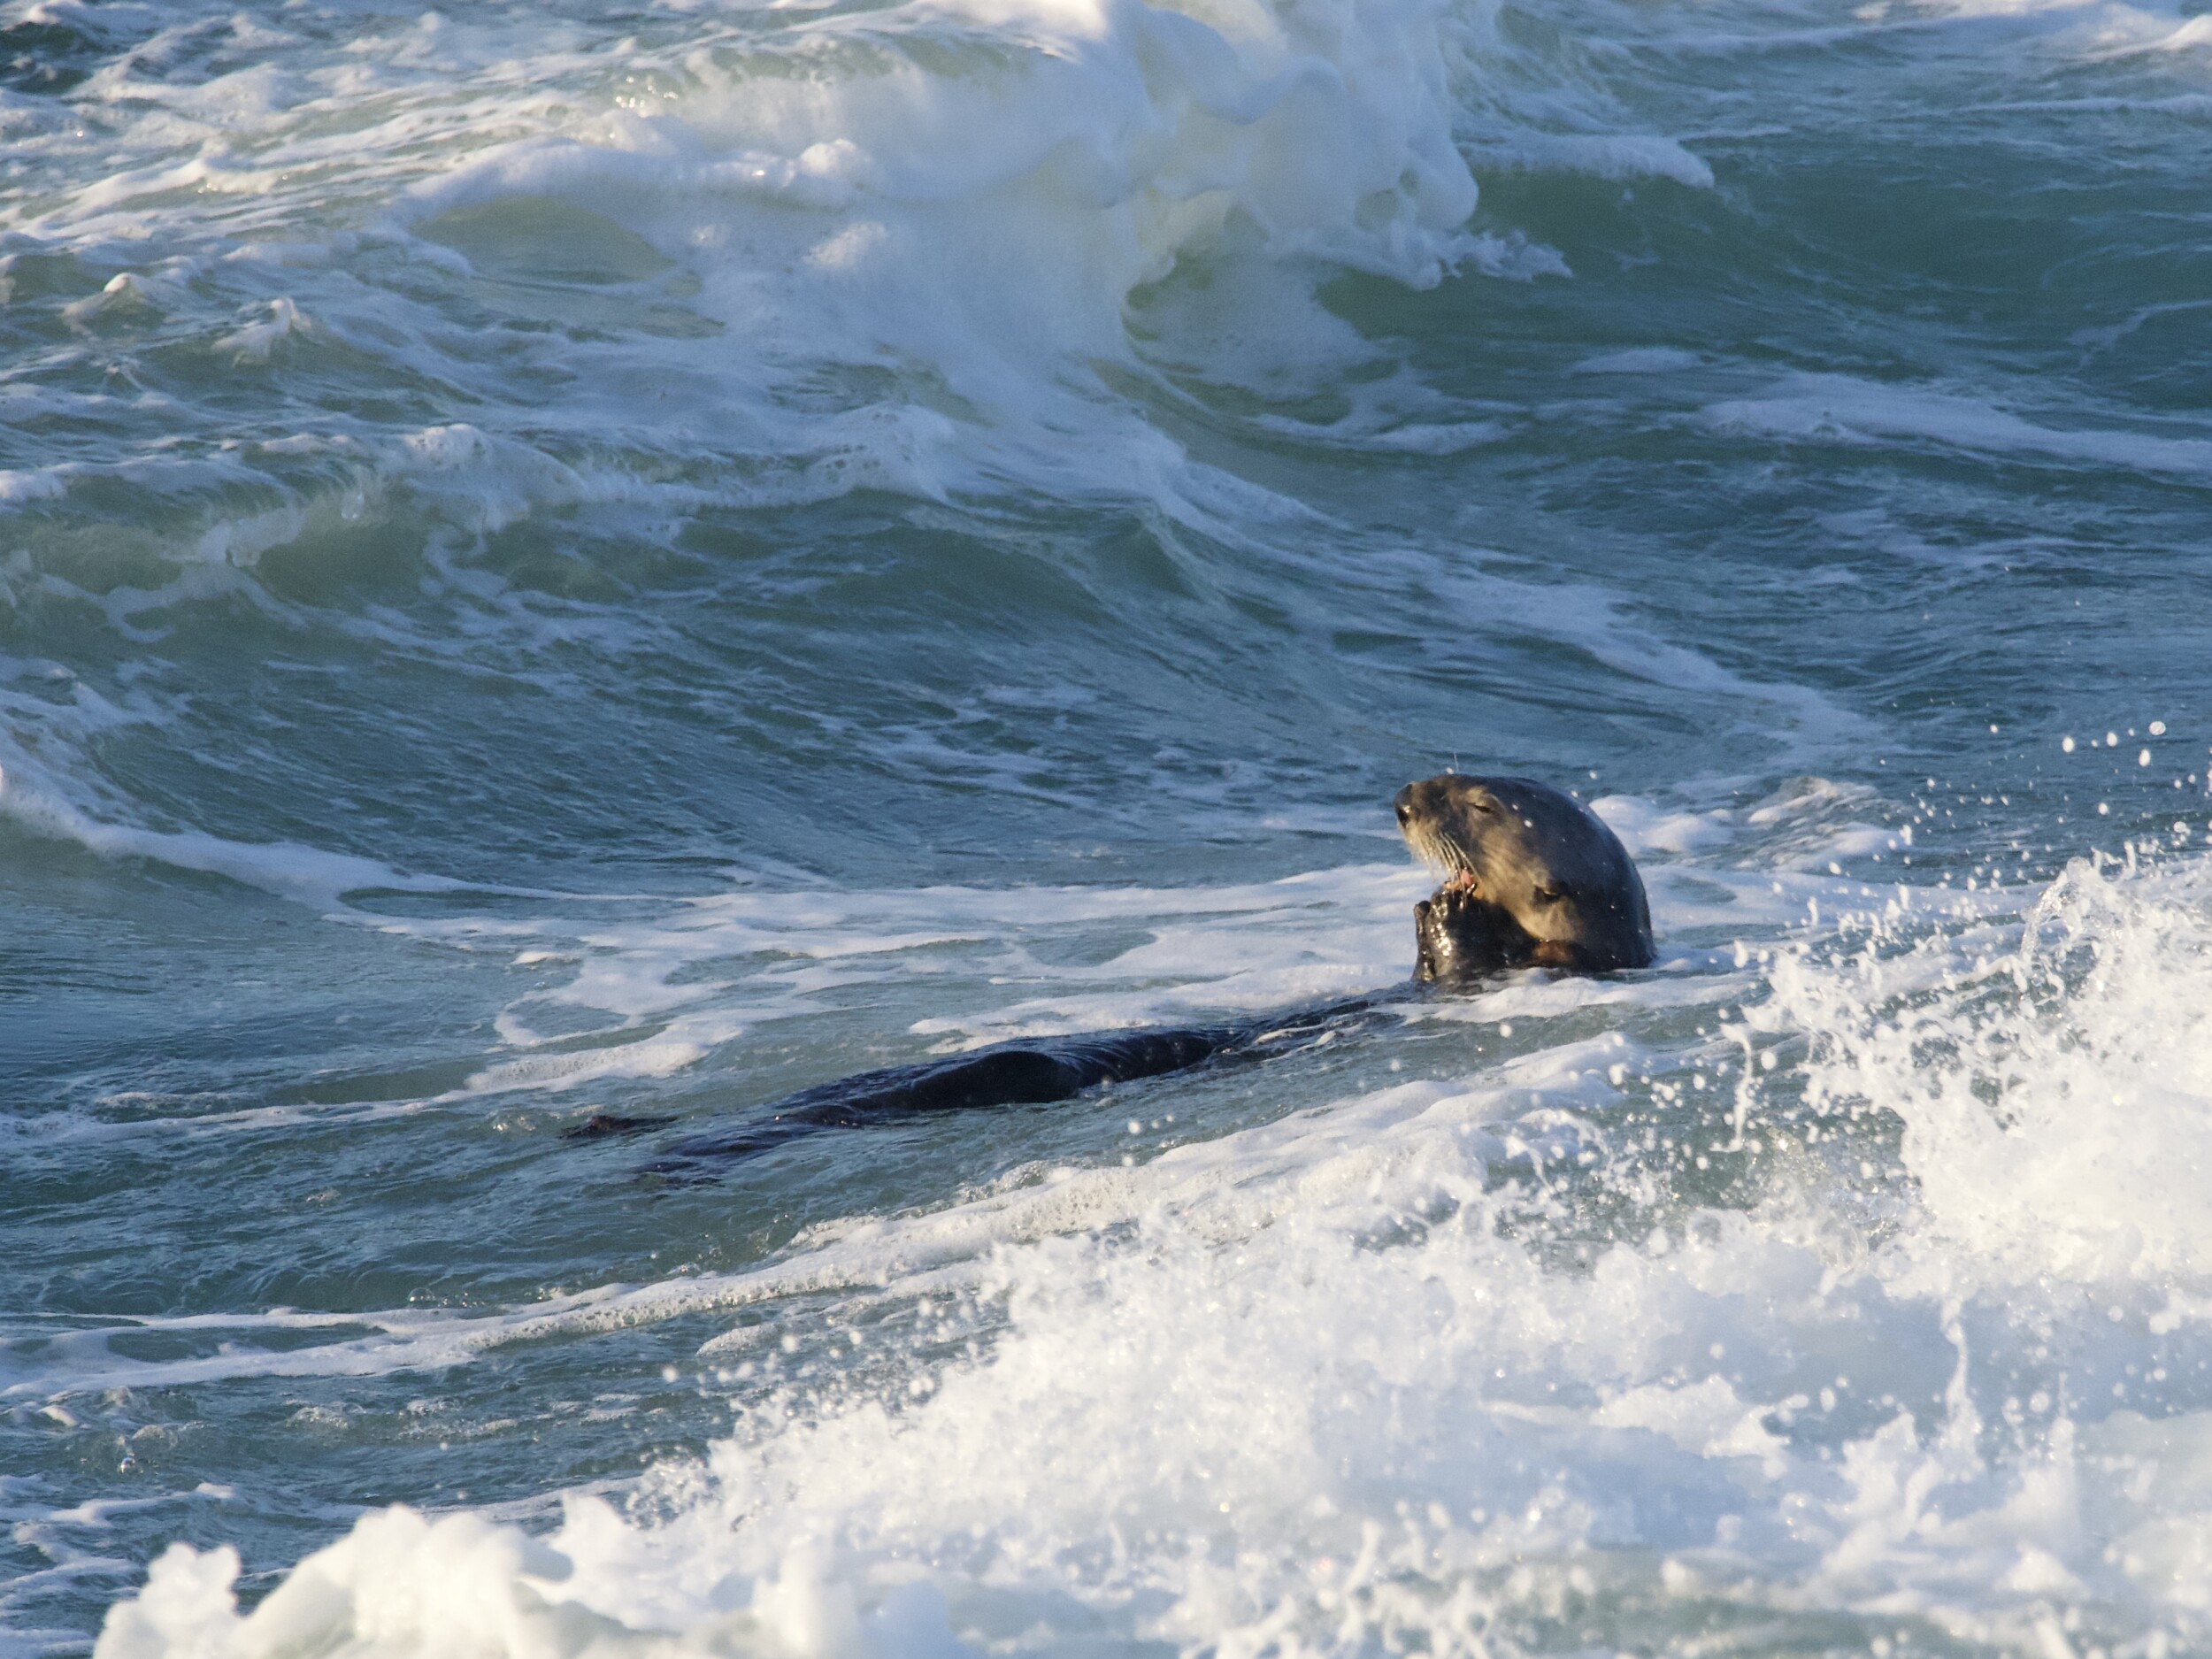 Southern Sea Otter Eating Mollusk in the Surf